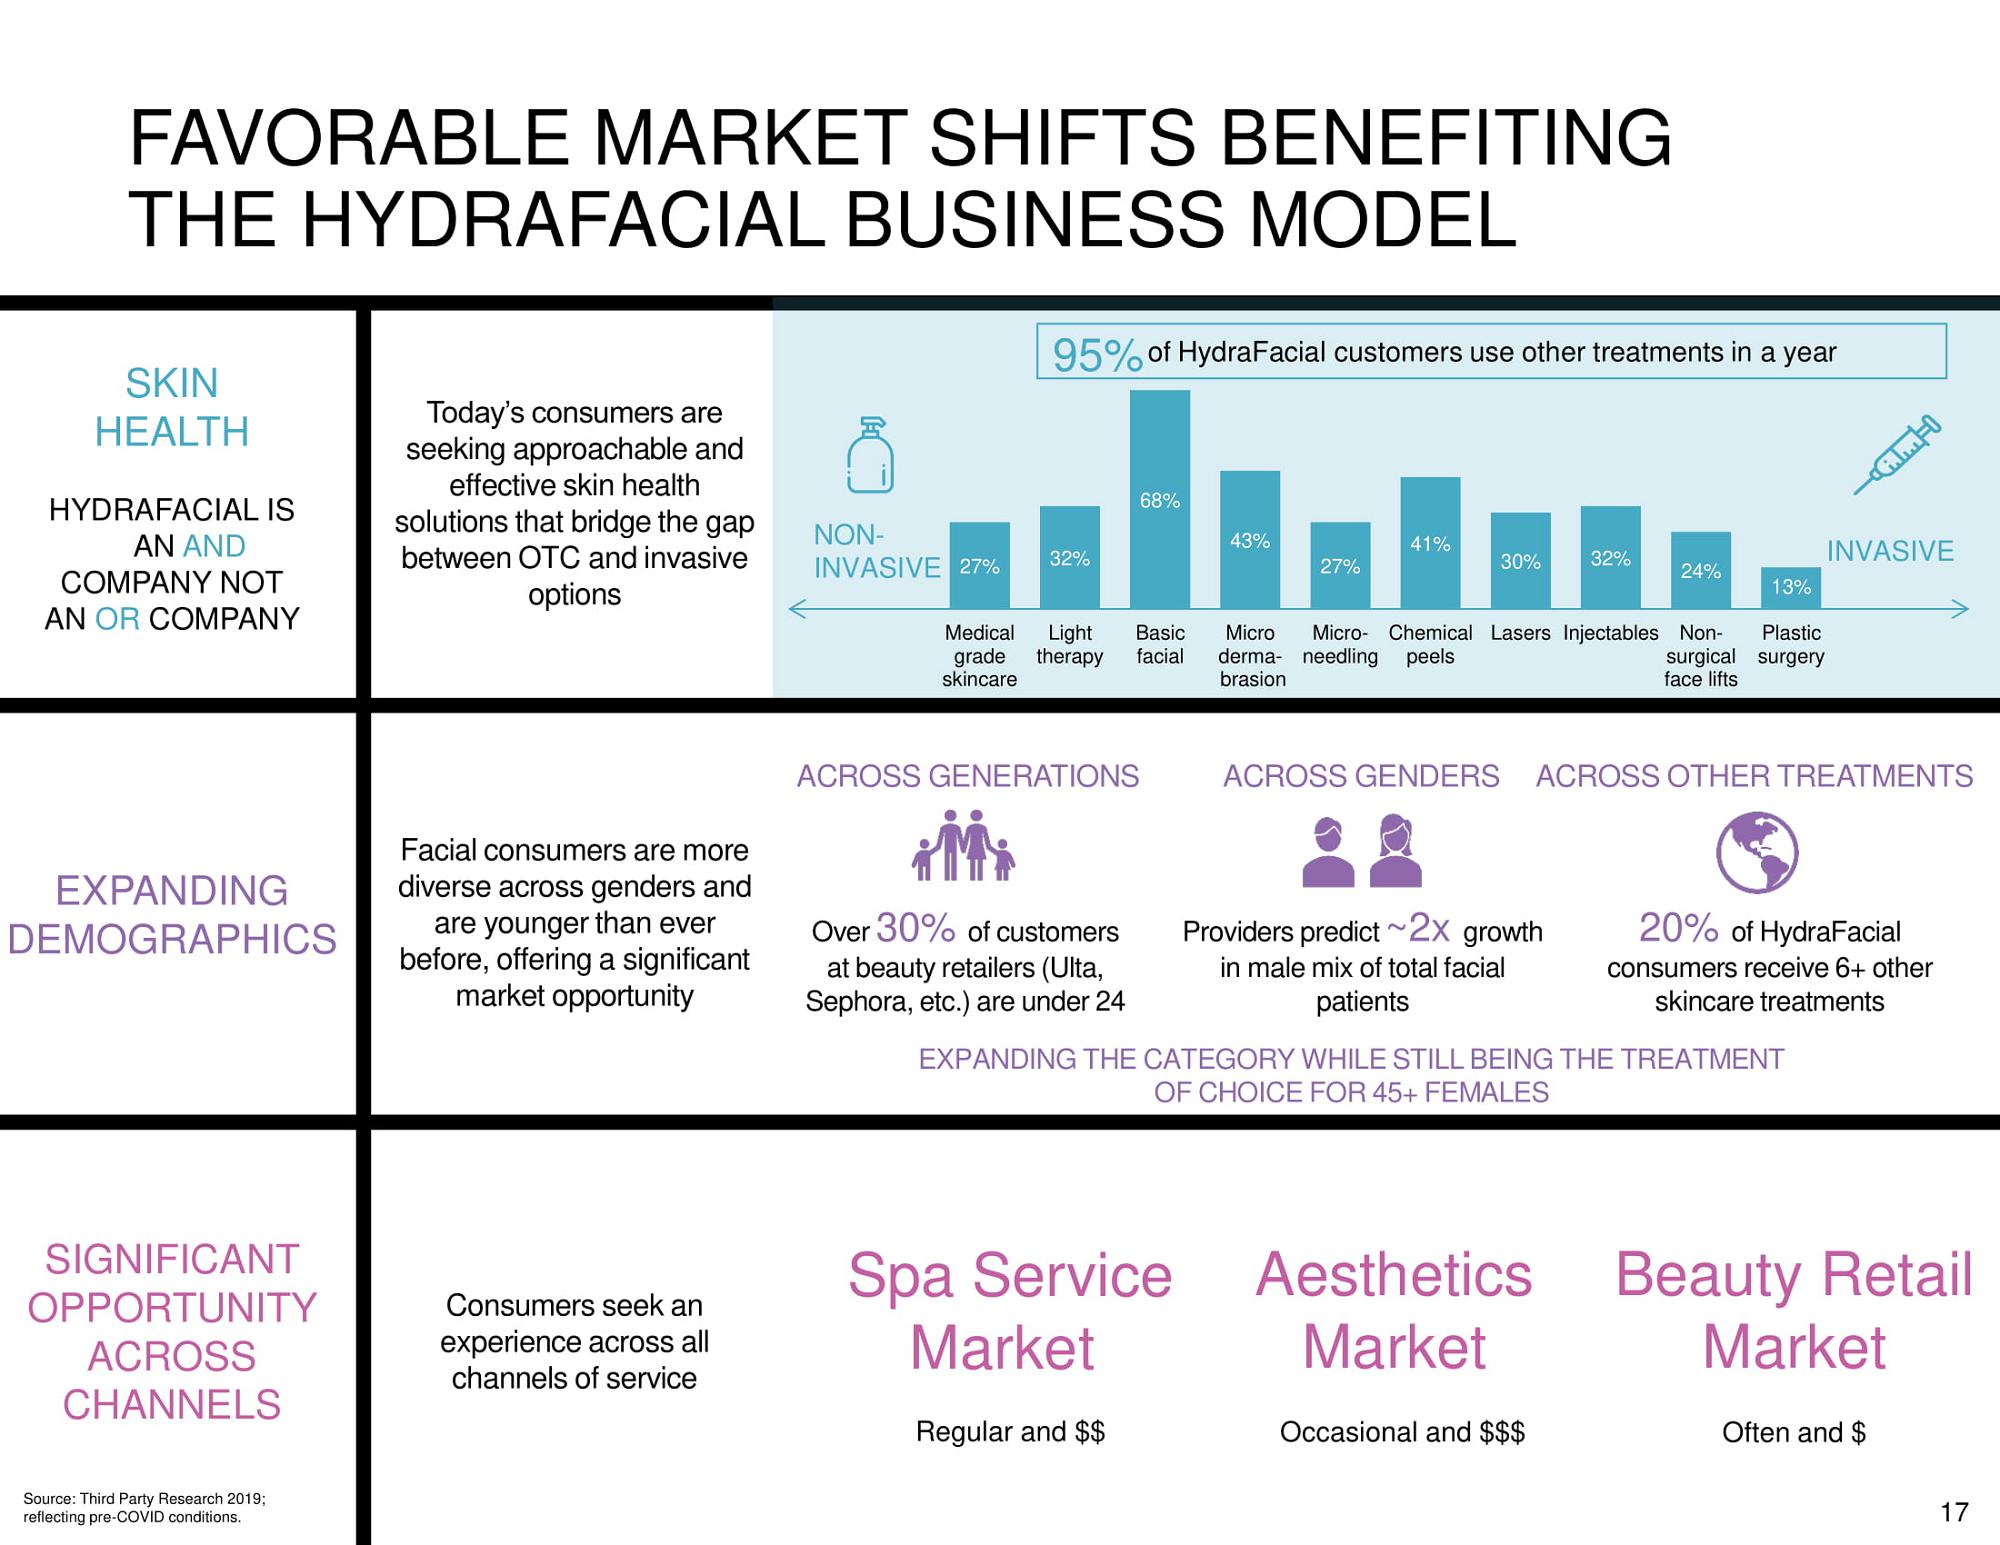 Here's How Sephora Used Best-sellers to Increase ROI by 43%